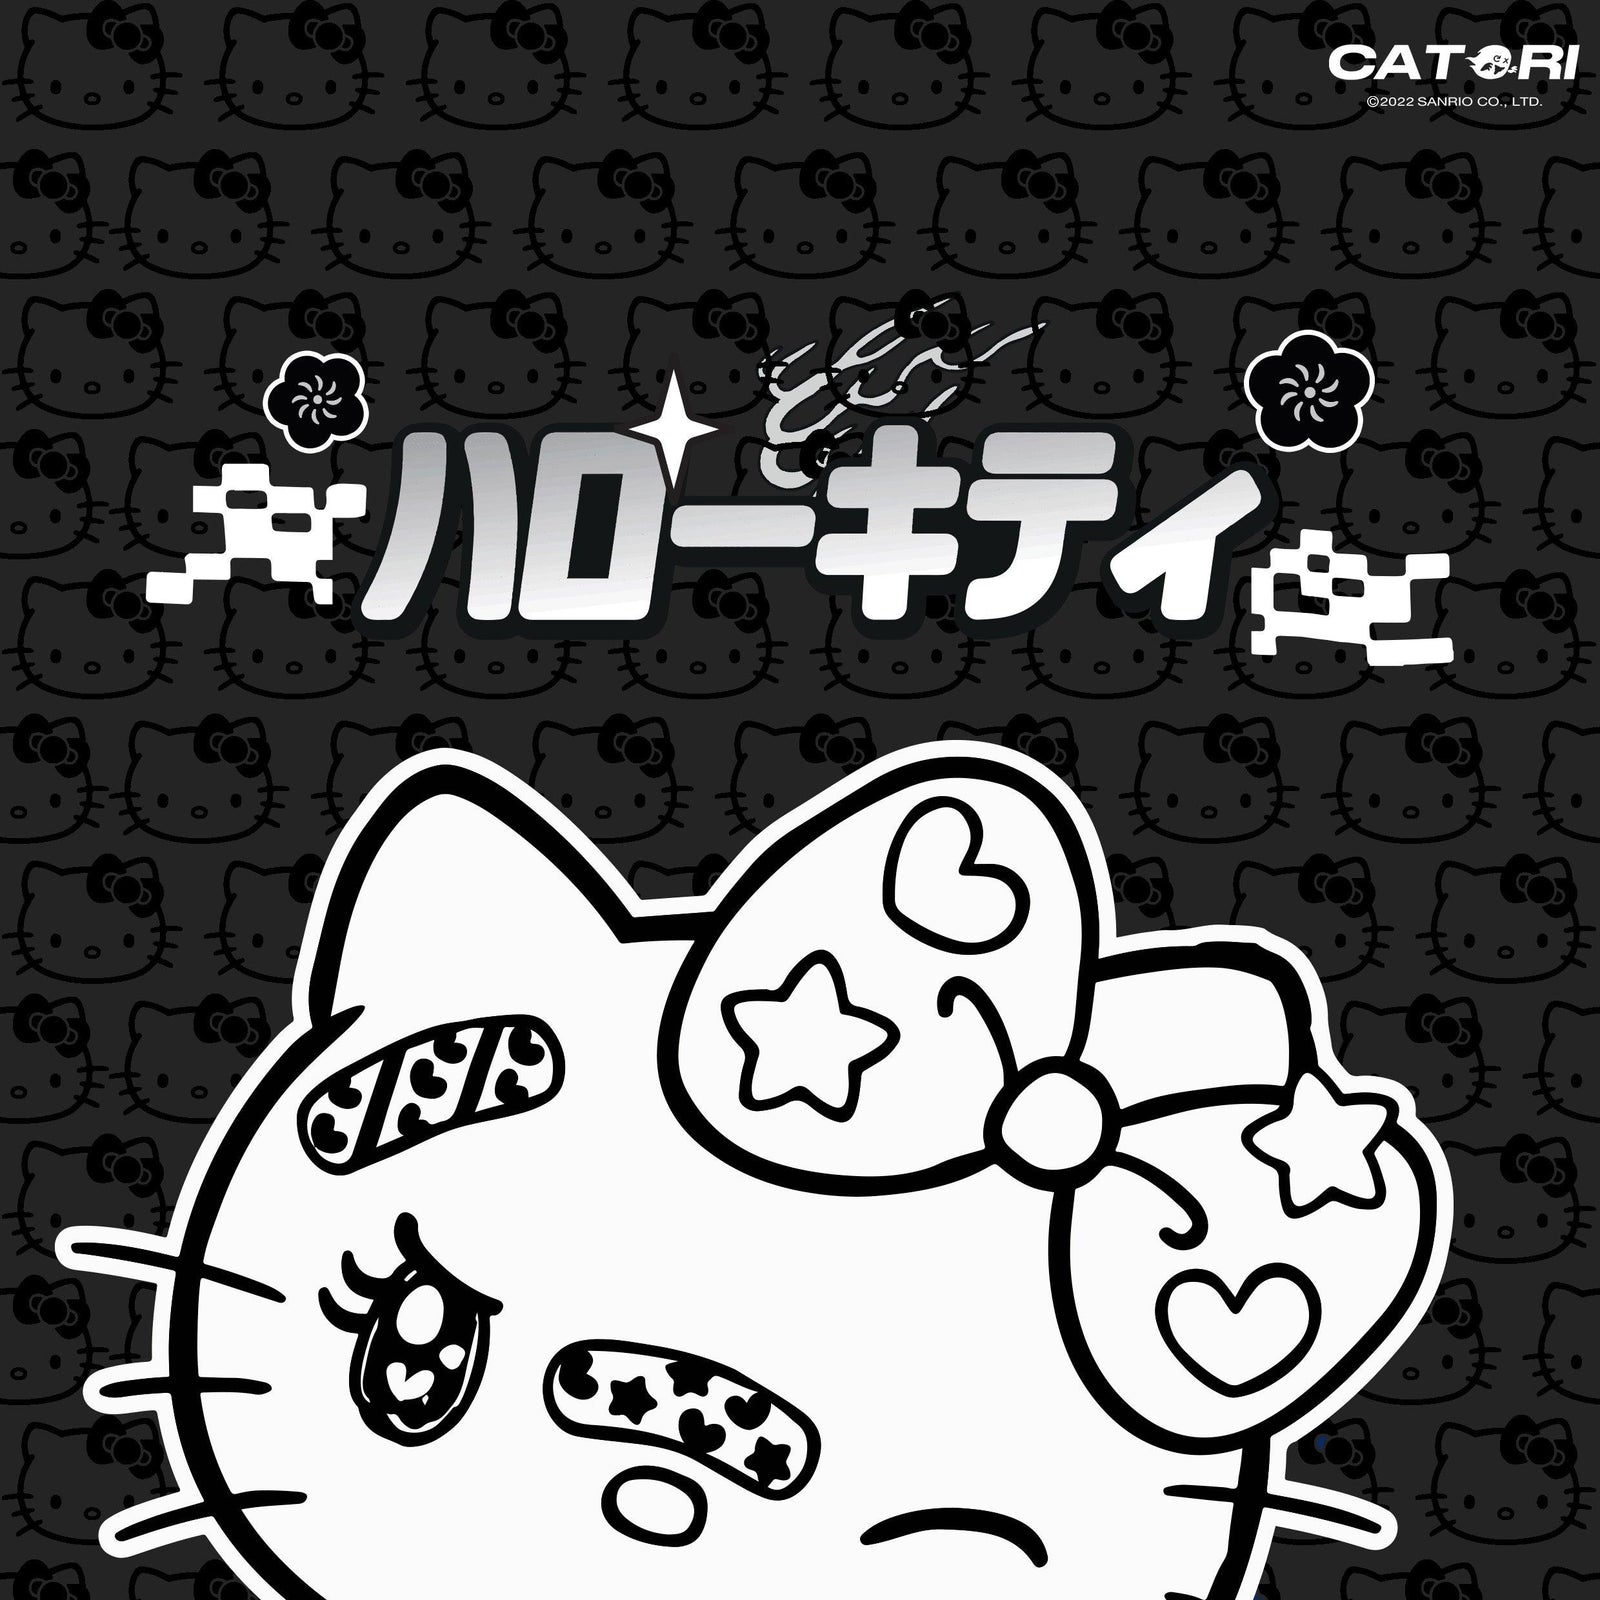 Hello Kitty Collection: The Ultimate Streetwear Collection for Anime Fans - Get Ready to Turn Heads with These Exclusive Designs - streetwear at Catori Clothing | Graphic & Anime Tees, Hoodies & Sweatshirts 